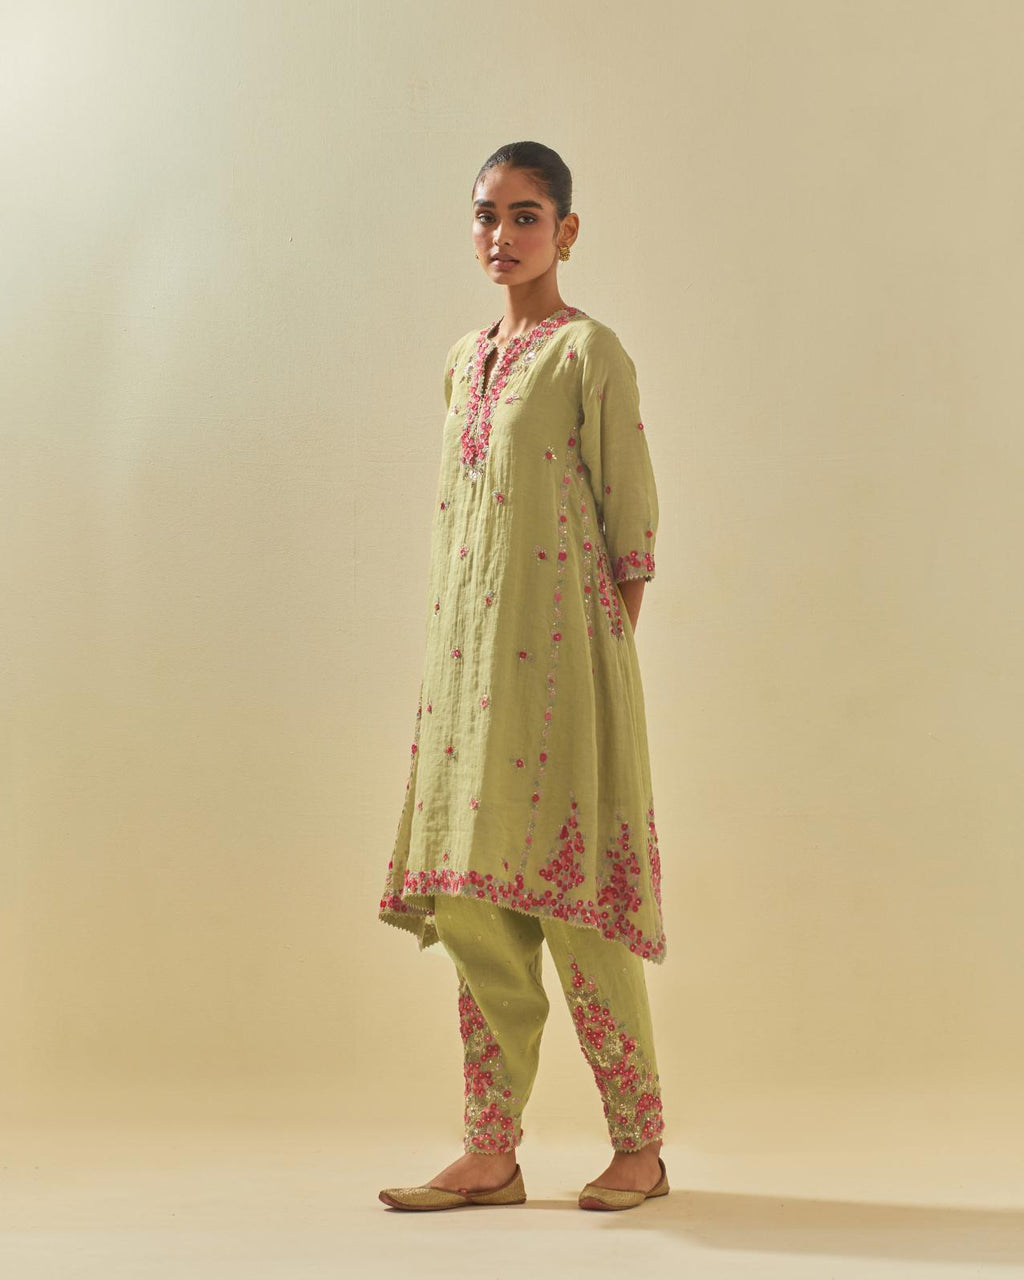 Green tissue chanderi mid length kalidar kurta set with hand cut silk flower embroidery, highlighted with gold sequins.